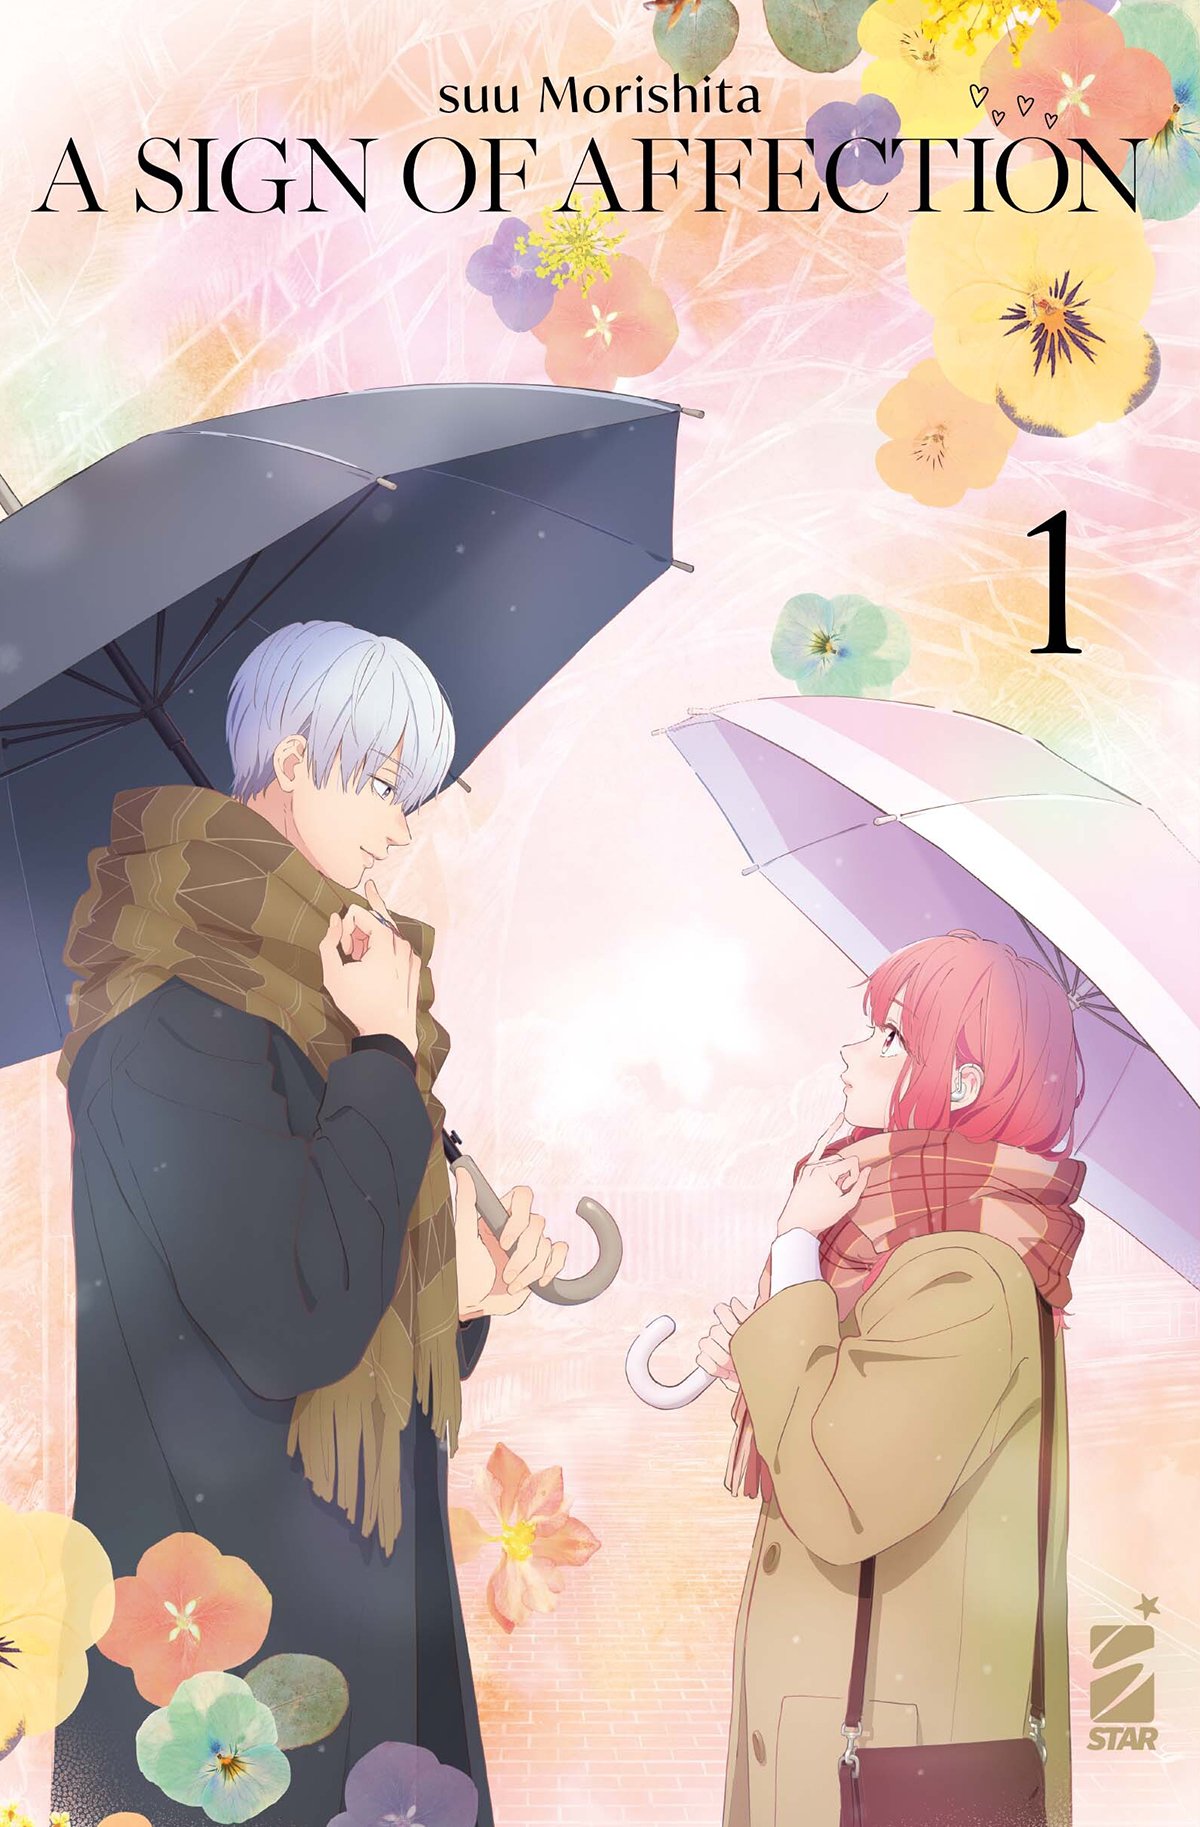 A SIGN OF AFFECTION 1 VARIANT - ANIME AMICI 288